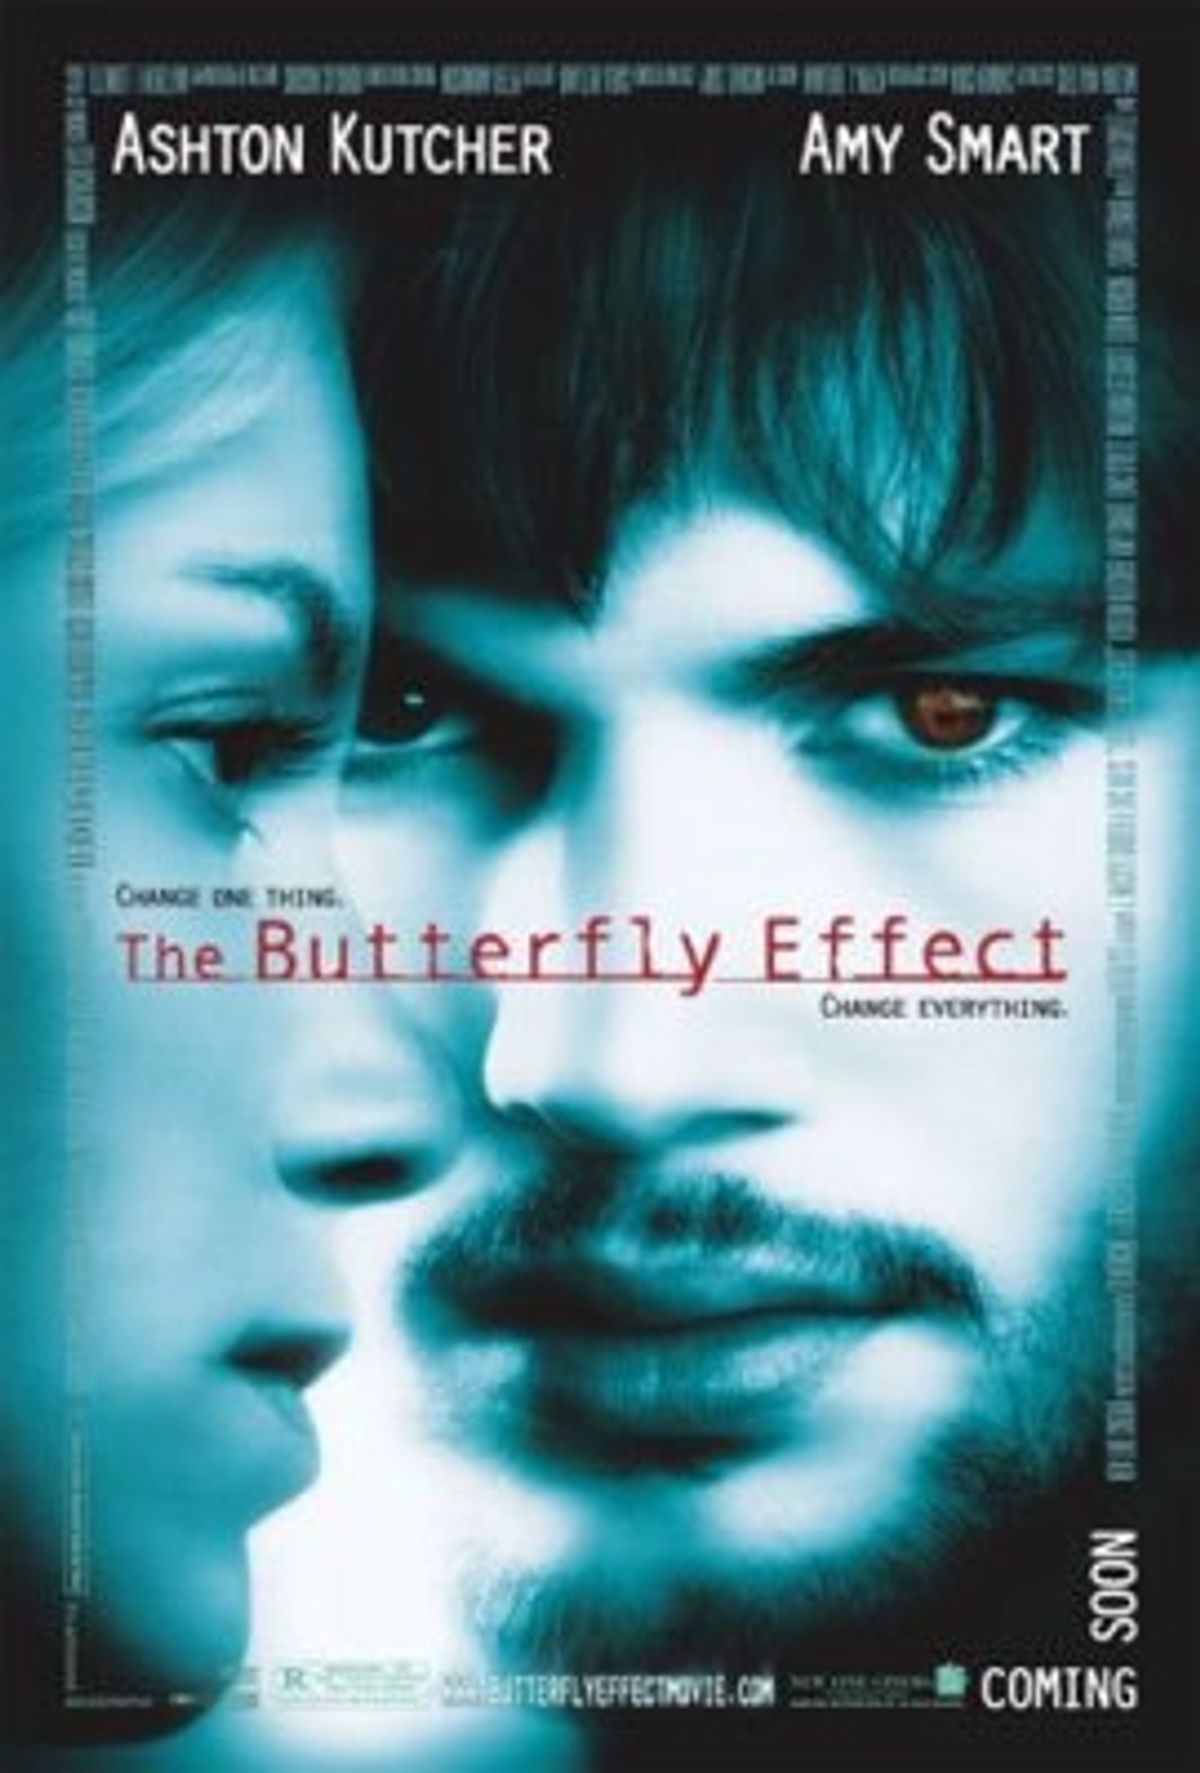 A Movie Worth Watching: The Butterfly Effect